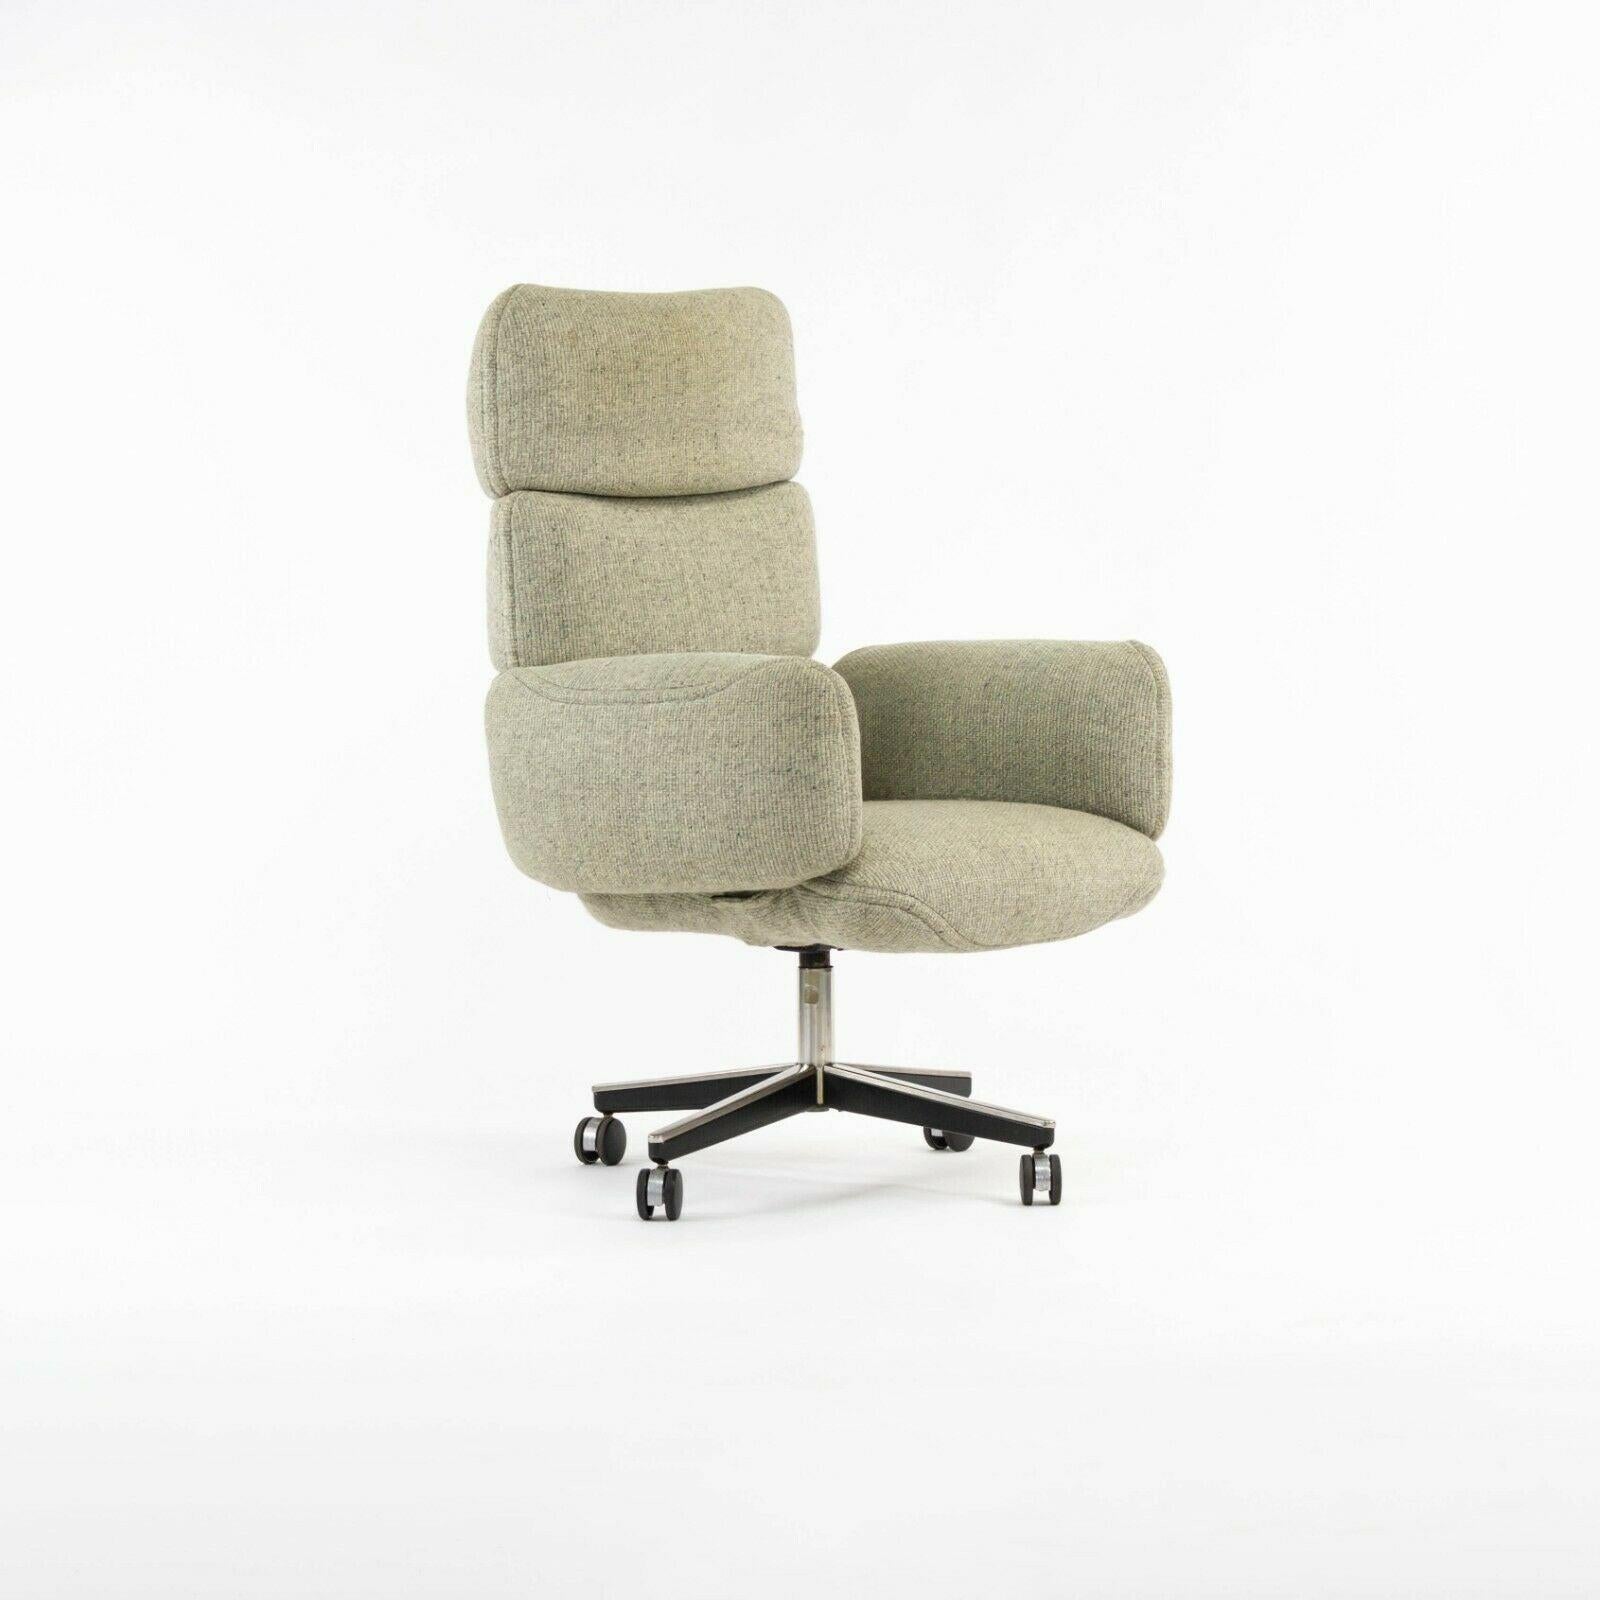 listed for sale is an Otto Zapf rolling desk chair with high back, produced by Knoll International. This is an iconic and rare example, which dates to circa 1982. The chair is in very good to excellent vintage condition with some light wear to the